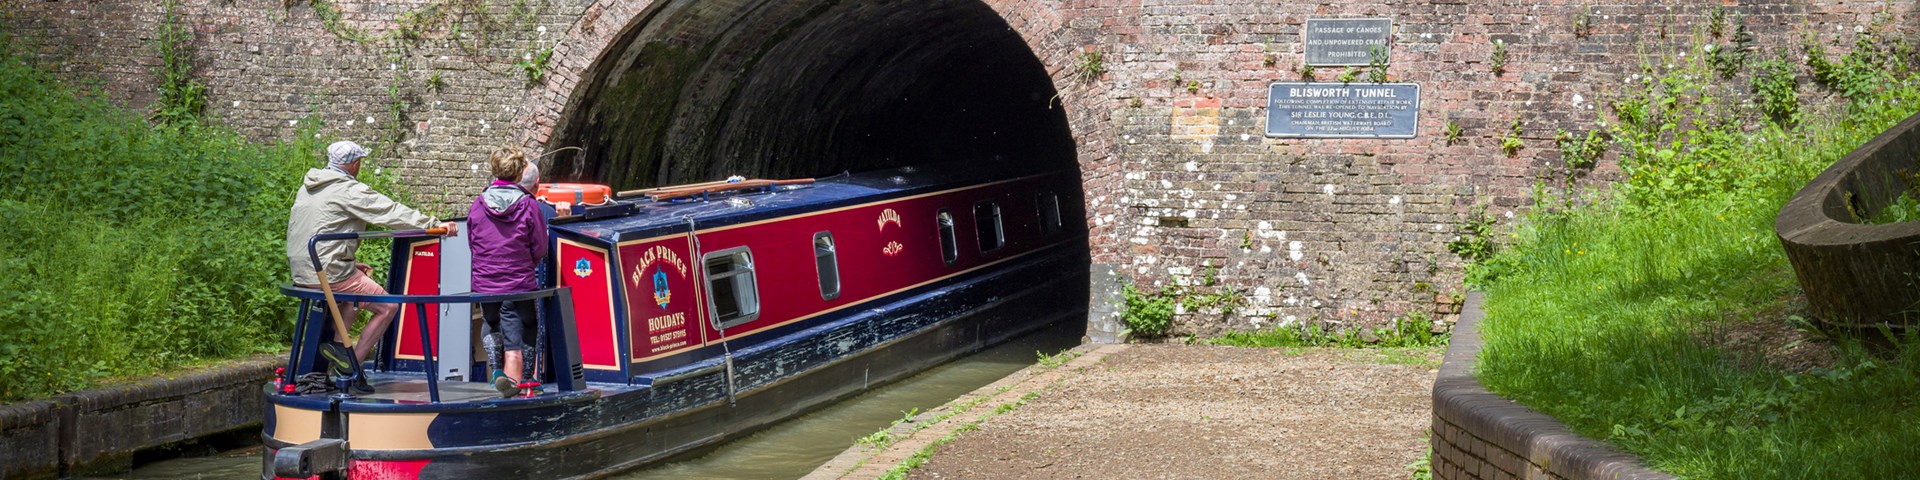 Narrowboat entering a canal tunnel